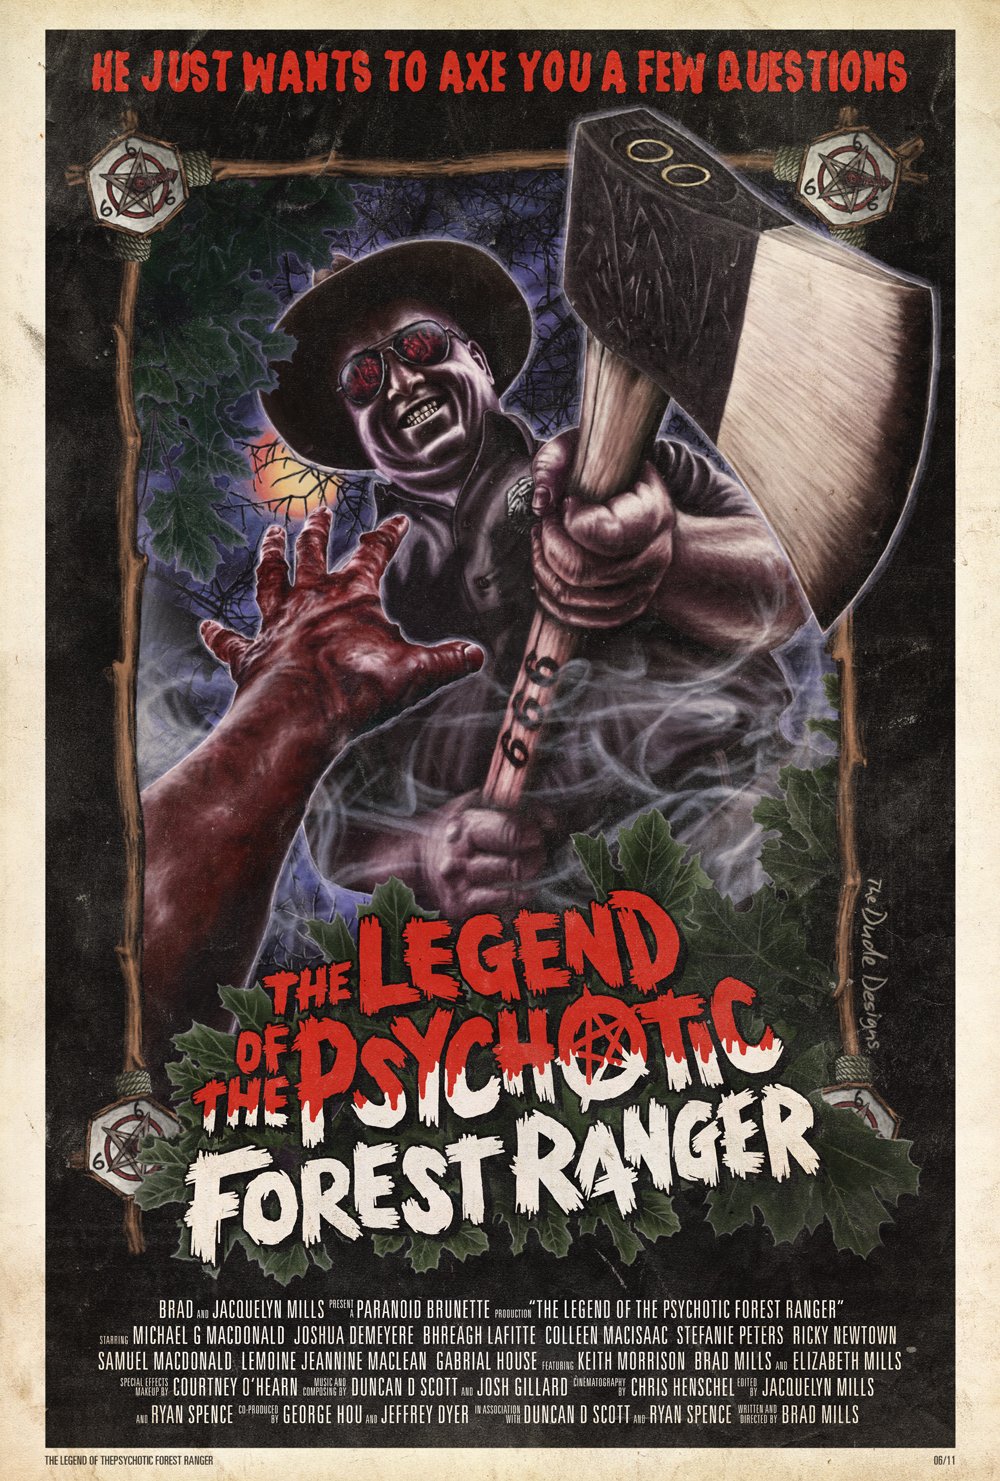 Return to Main Page for The Legend of the Psychotic Forest Ranger Posters